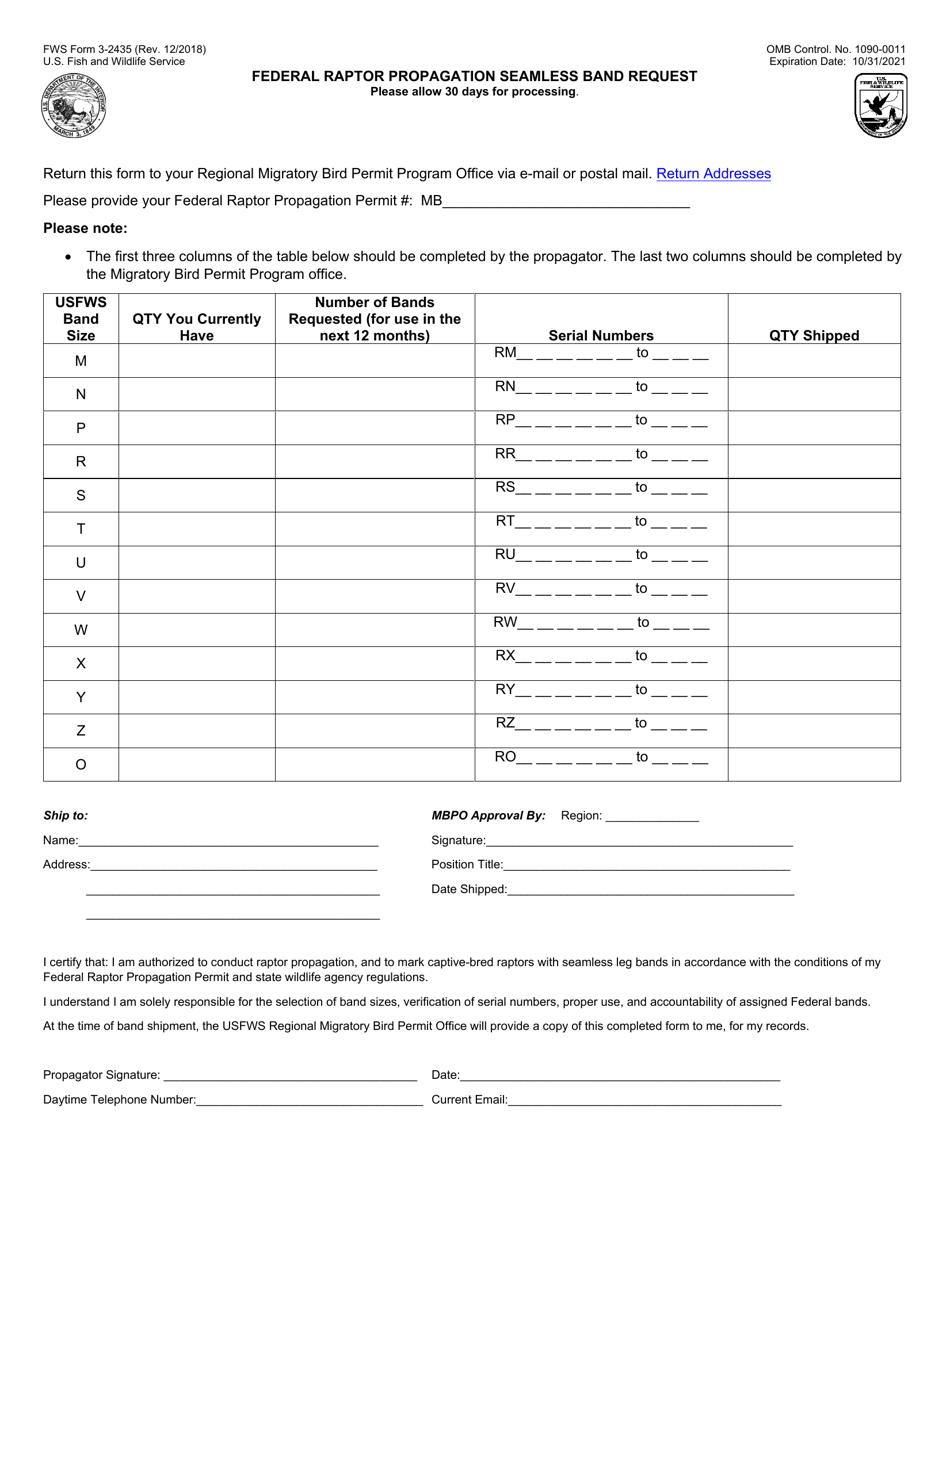 FWS Form 3-2435 Federal Raptor Propagation Seamless Band Request, Page 1